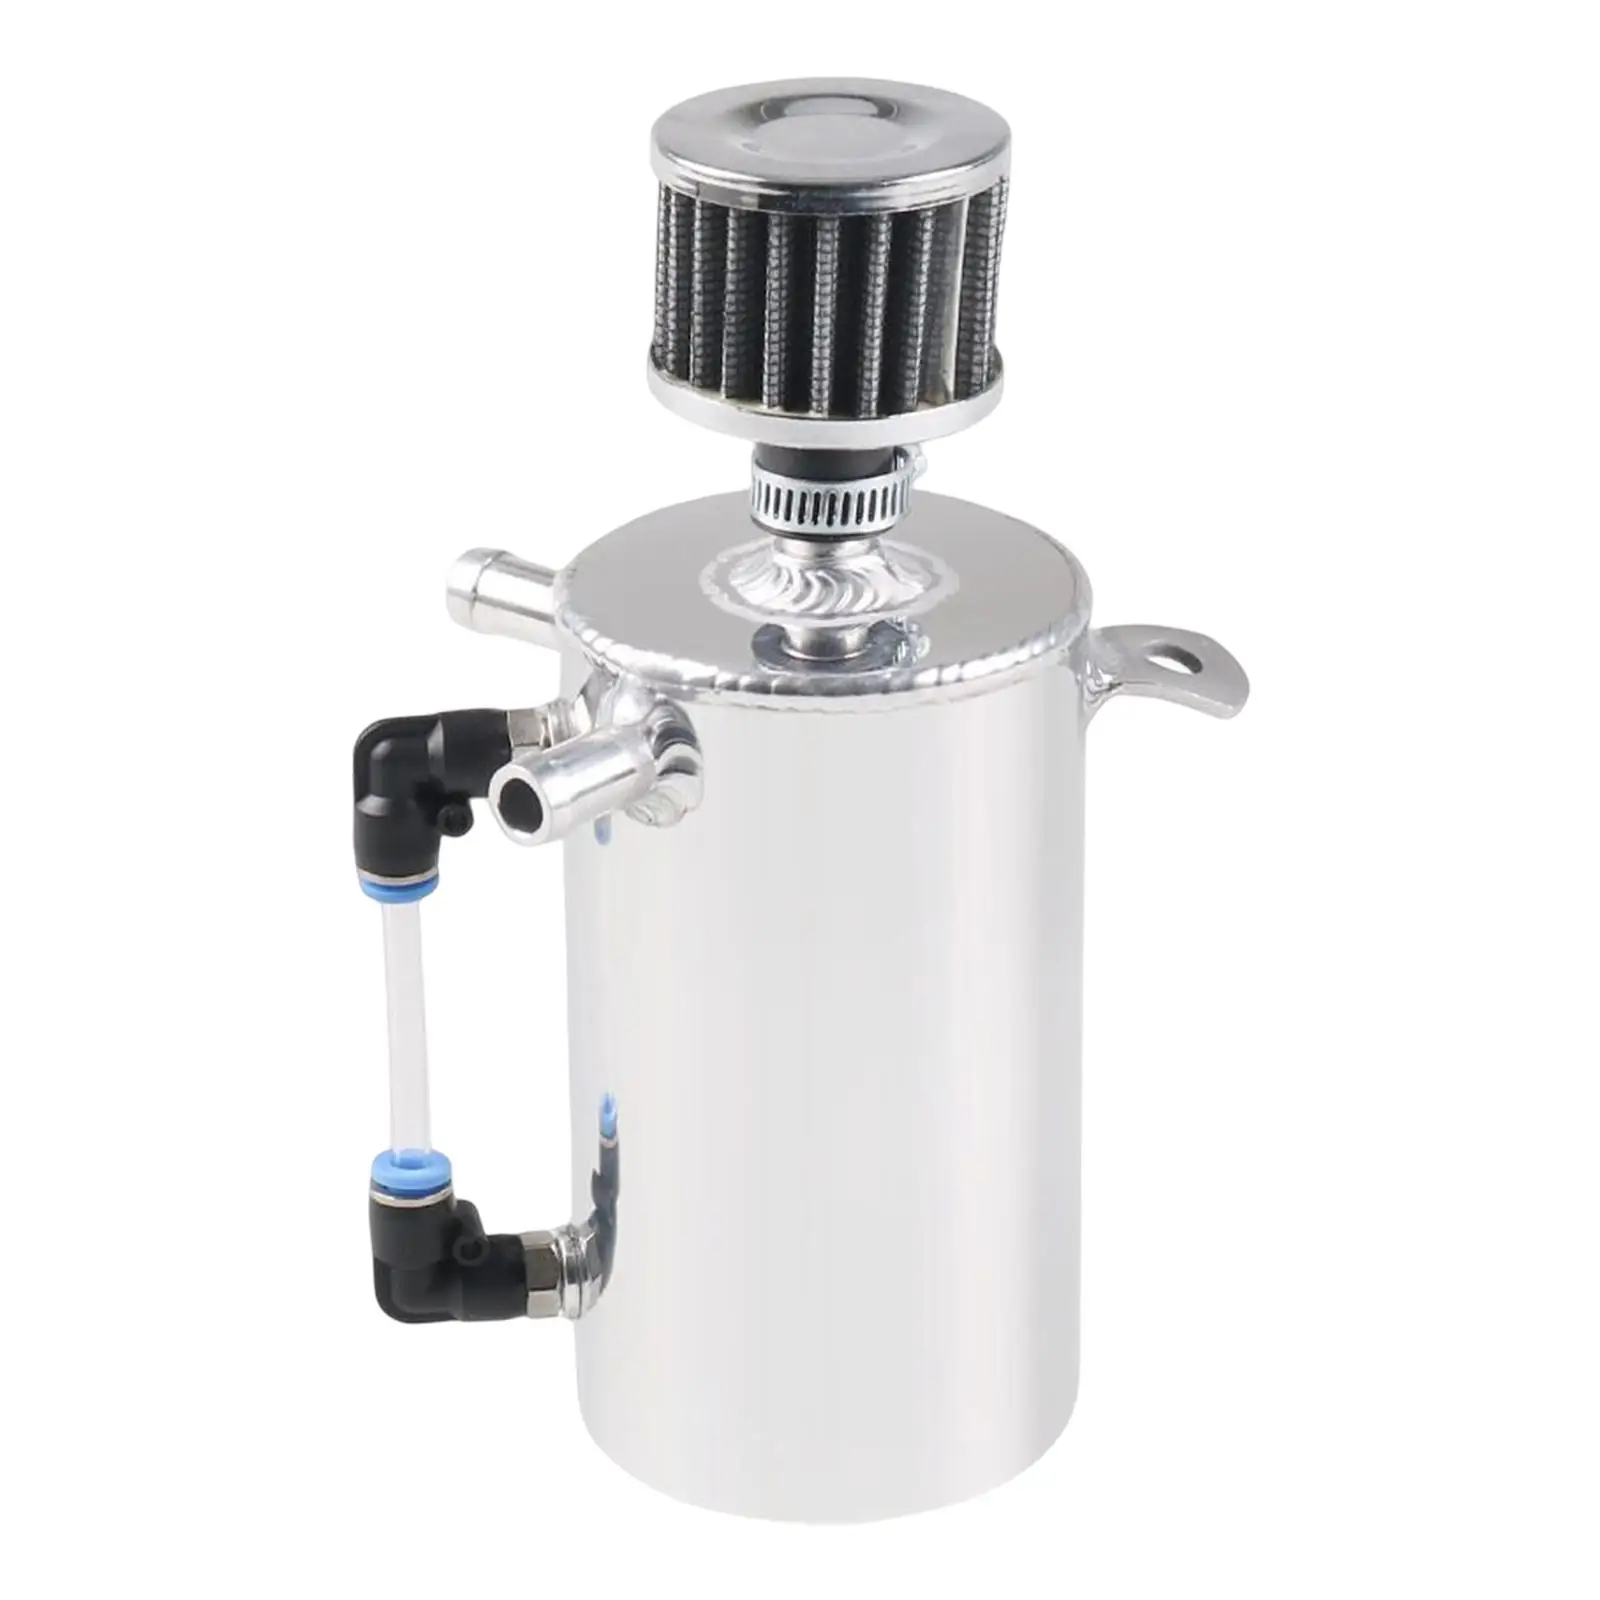 Car Oil Catch Can Tank 0.5L Engine Air Oil Separator Compact Silver with Breather Modified Automotive Reservoir Tank Oil Pot Kit